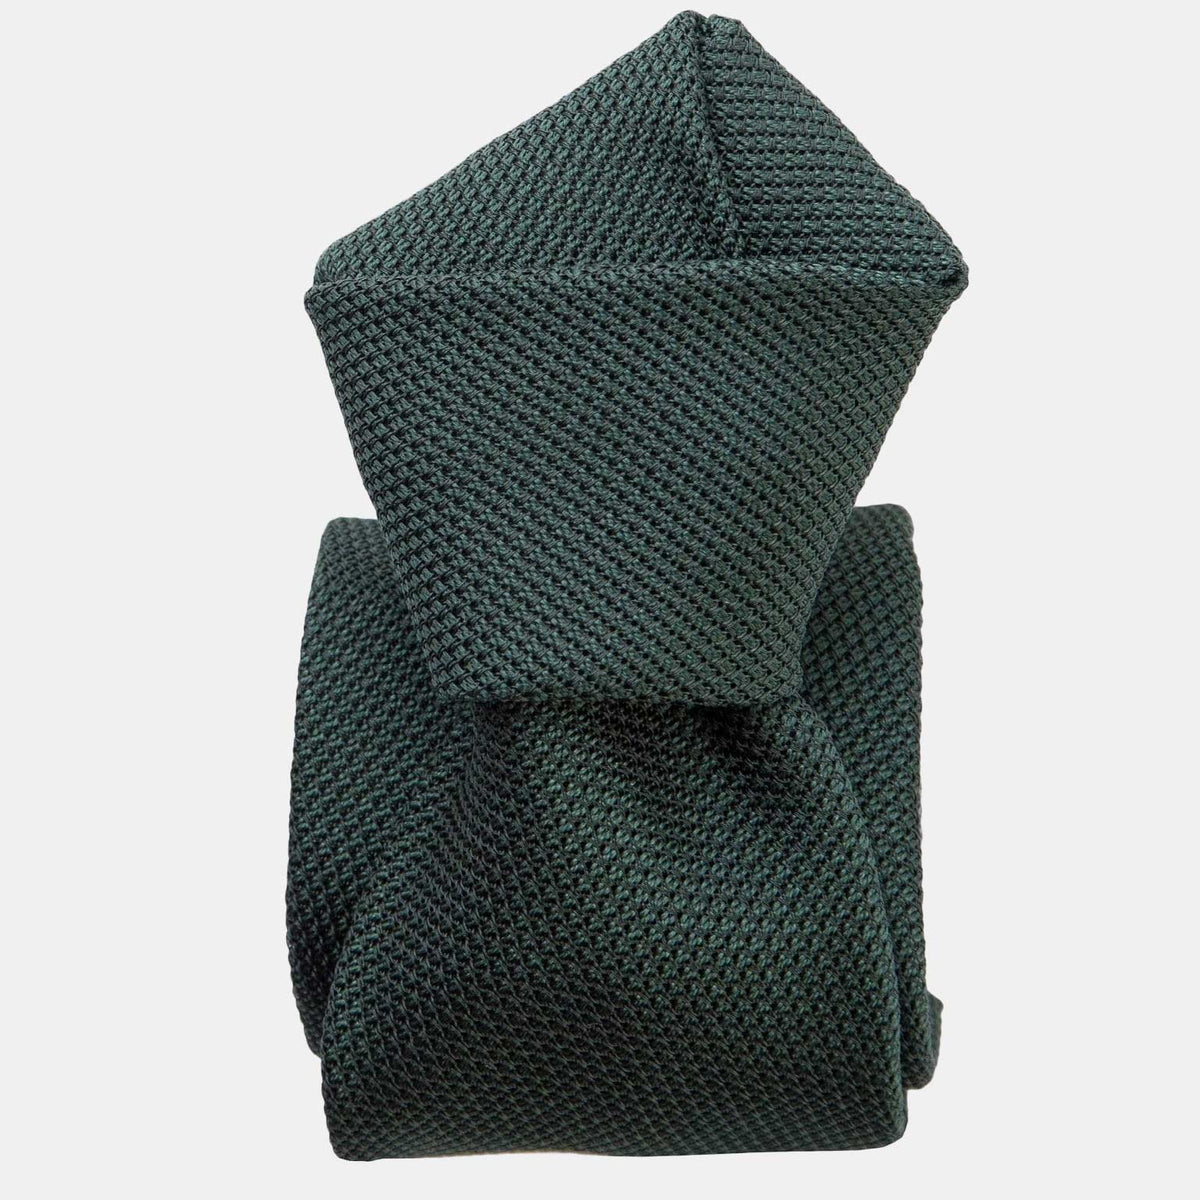 Silk Grenadine Tie - Forest Green - Made in Italy